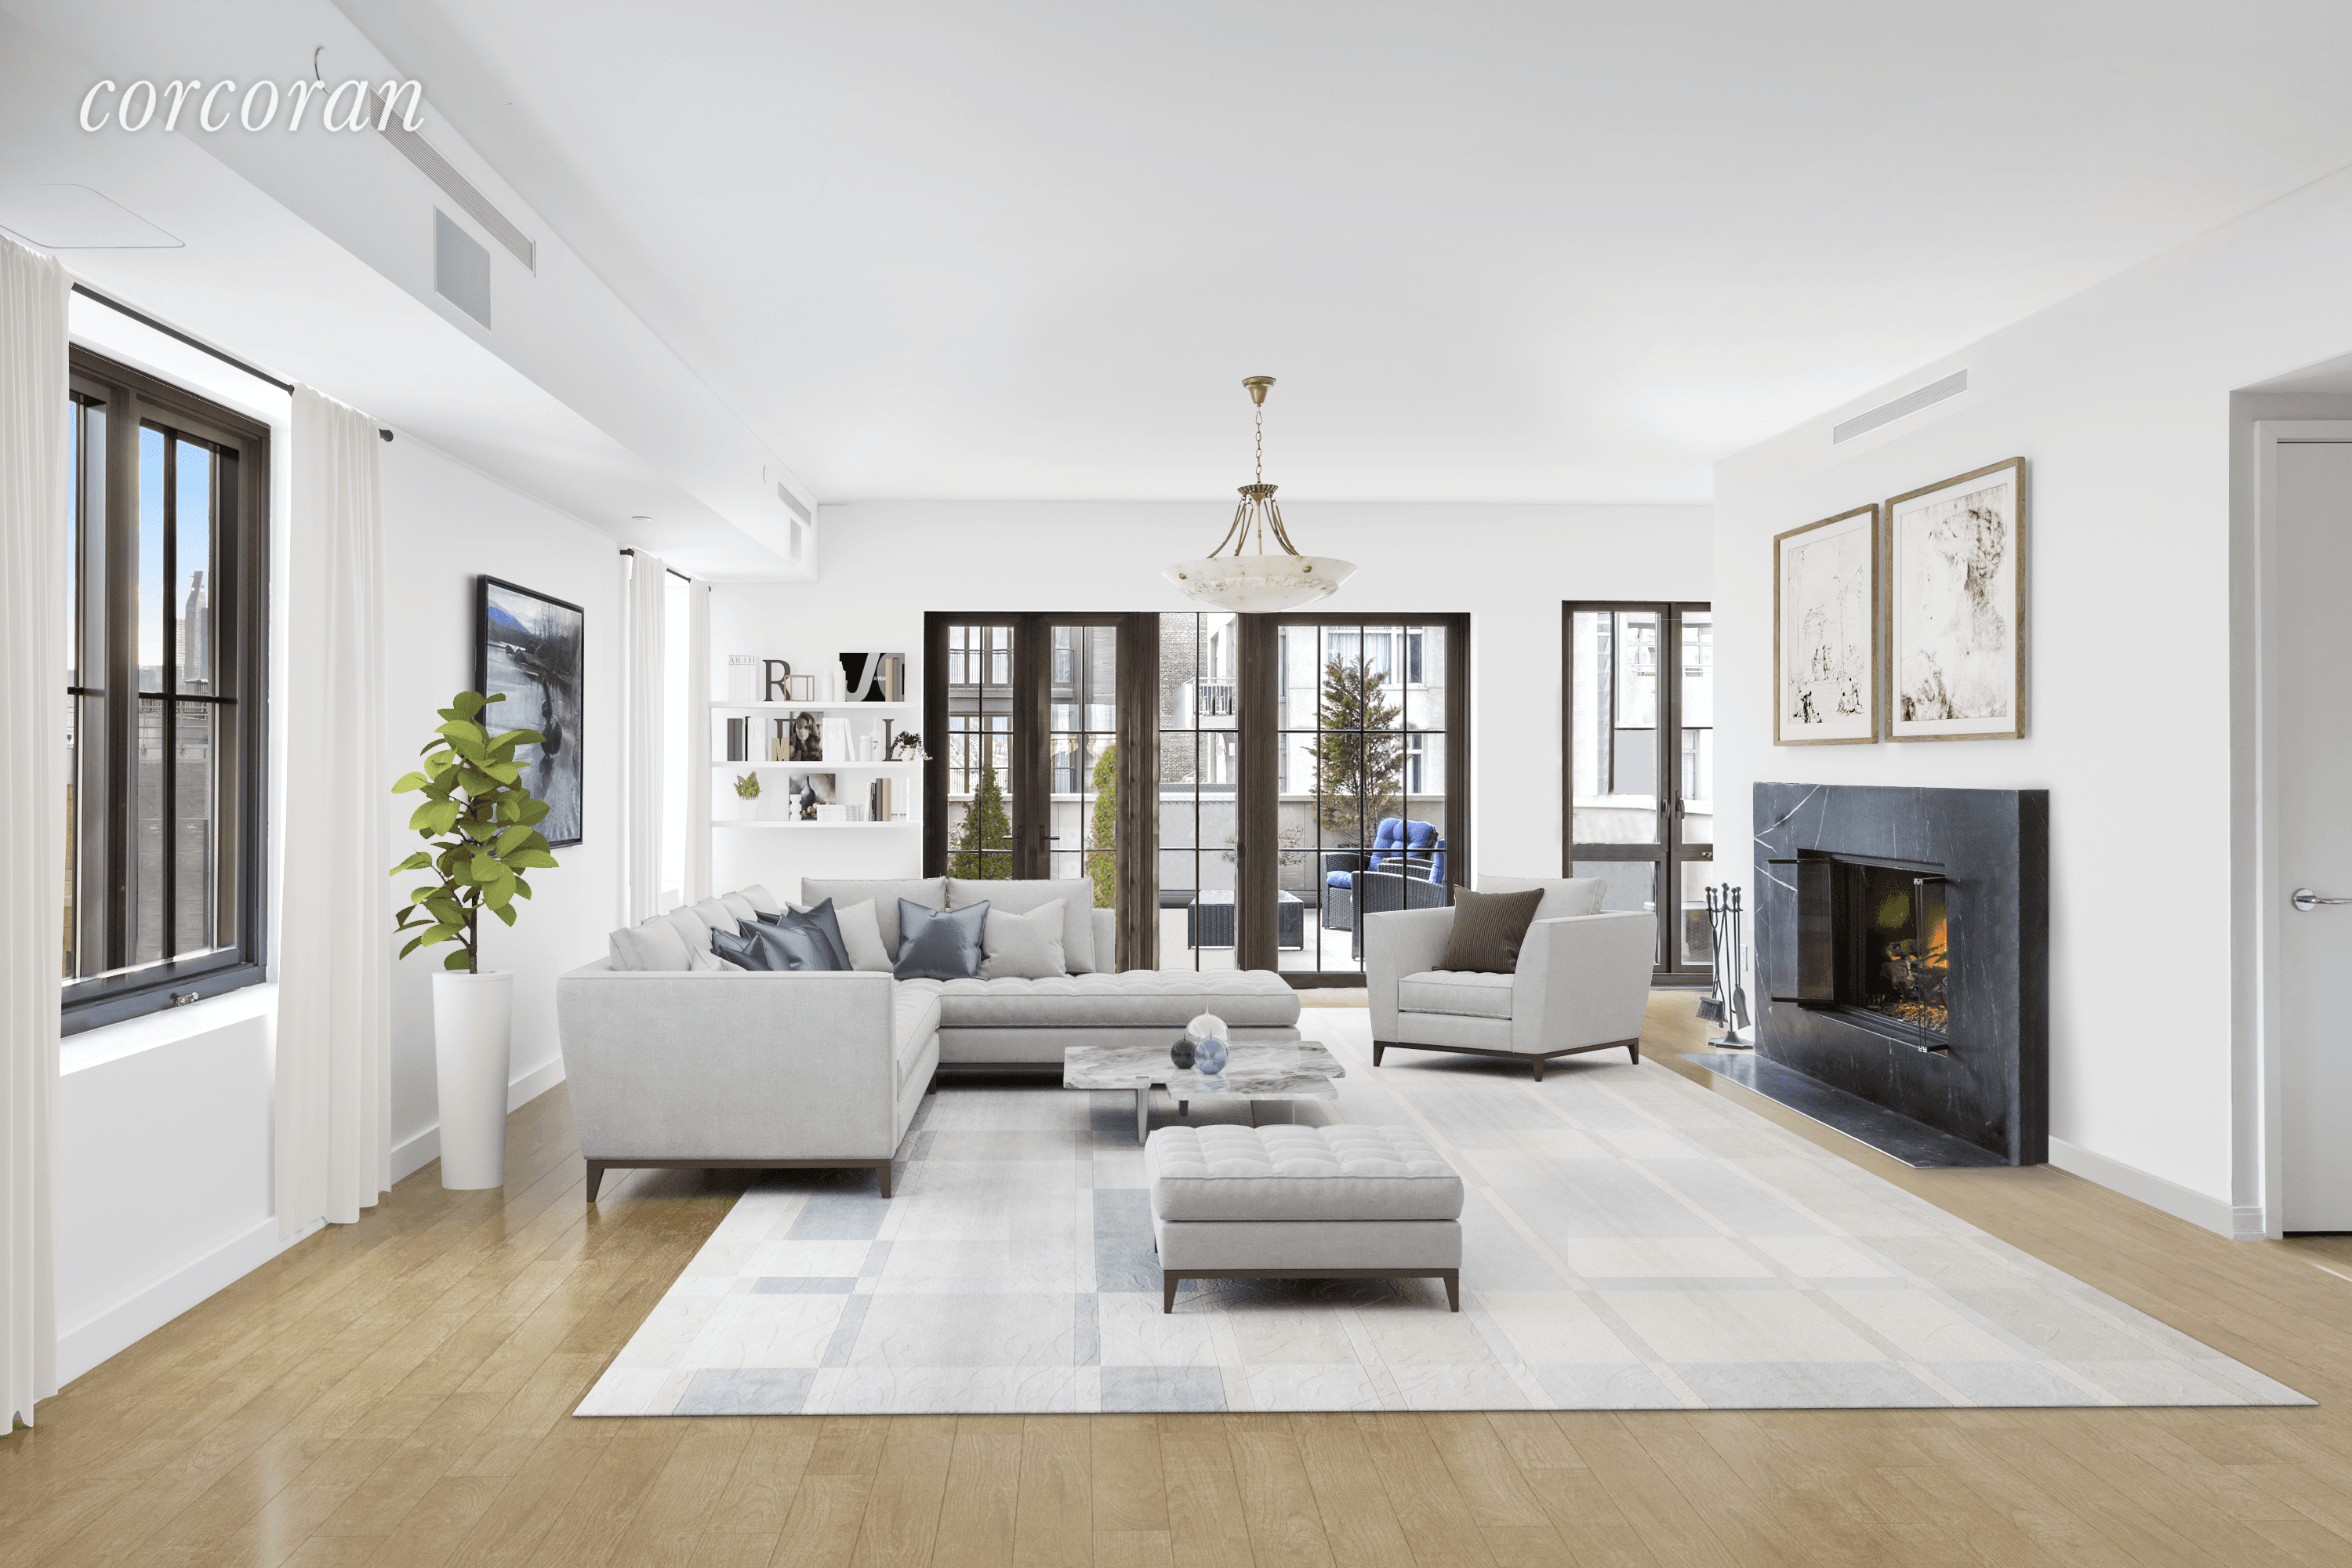 A rare combination of space, elegance and amenities await you in this most gracious and well designed home on the Upper Westside.